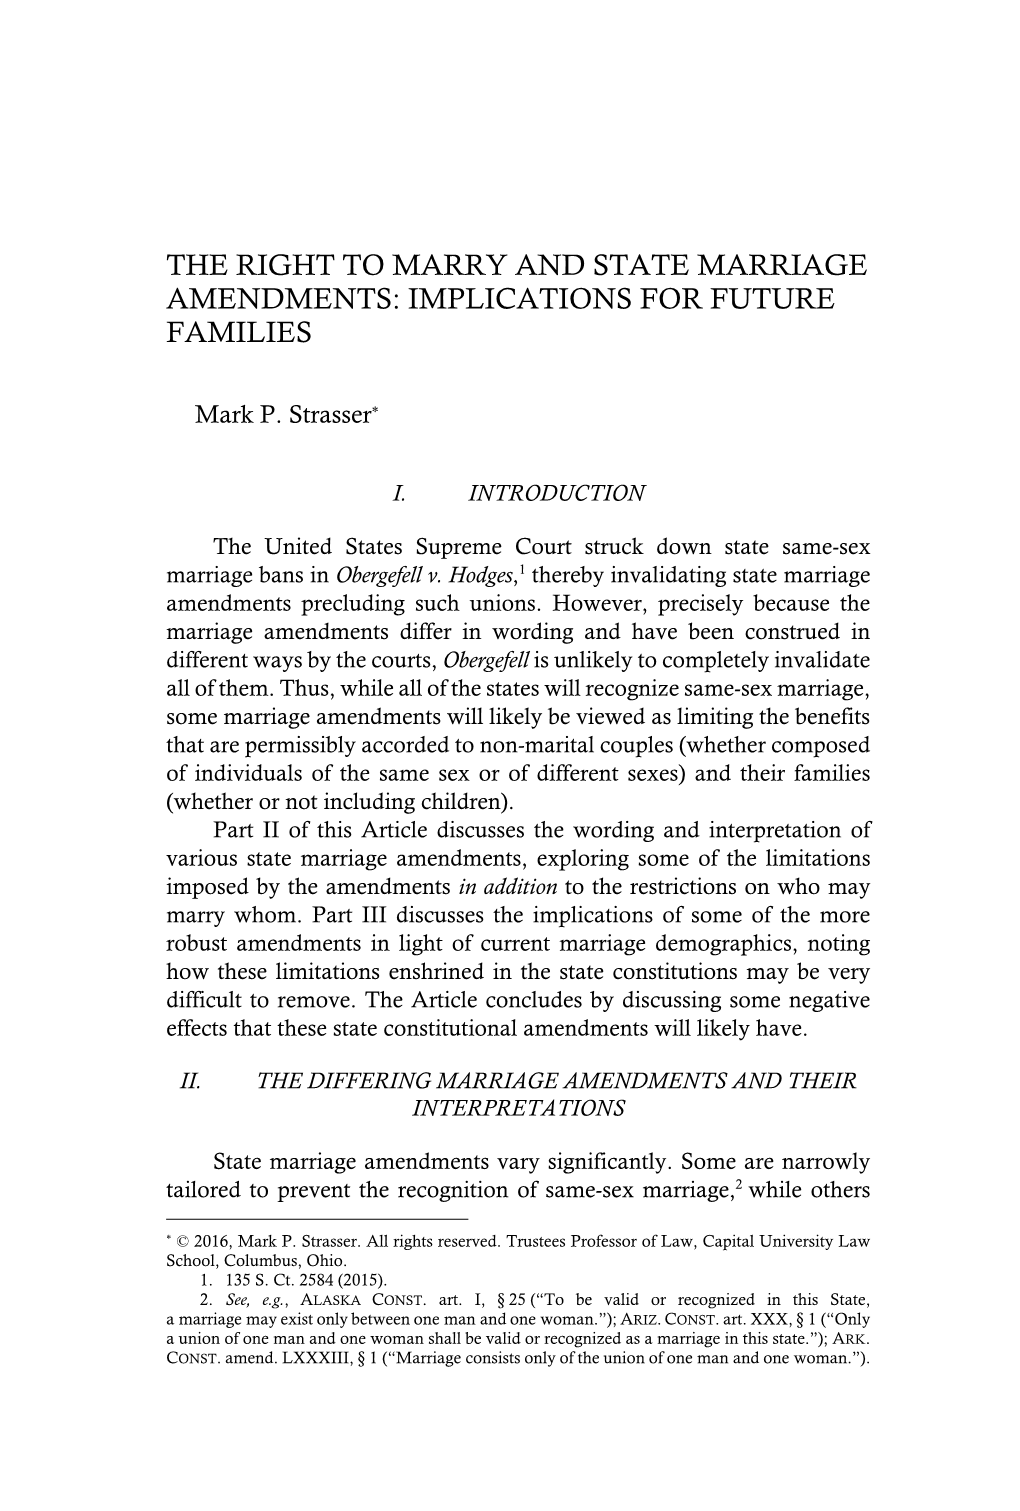 The Right to Marry and State Marriage Amendments: Implications for Future Families